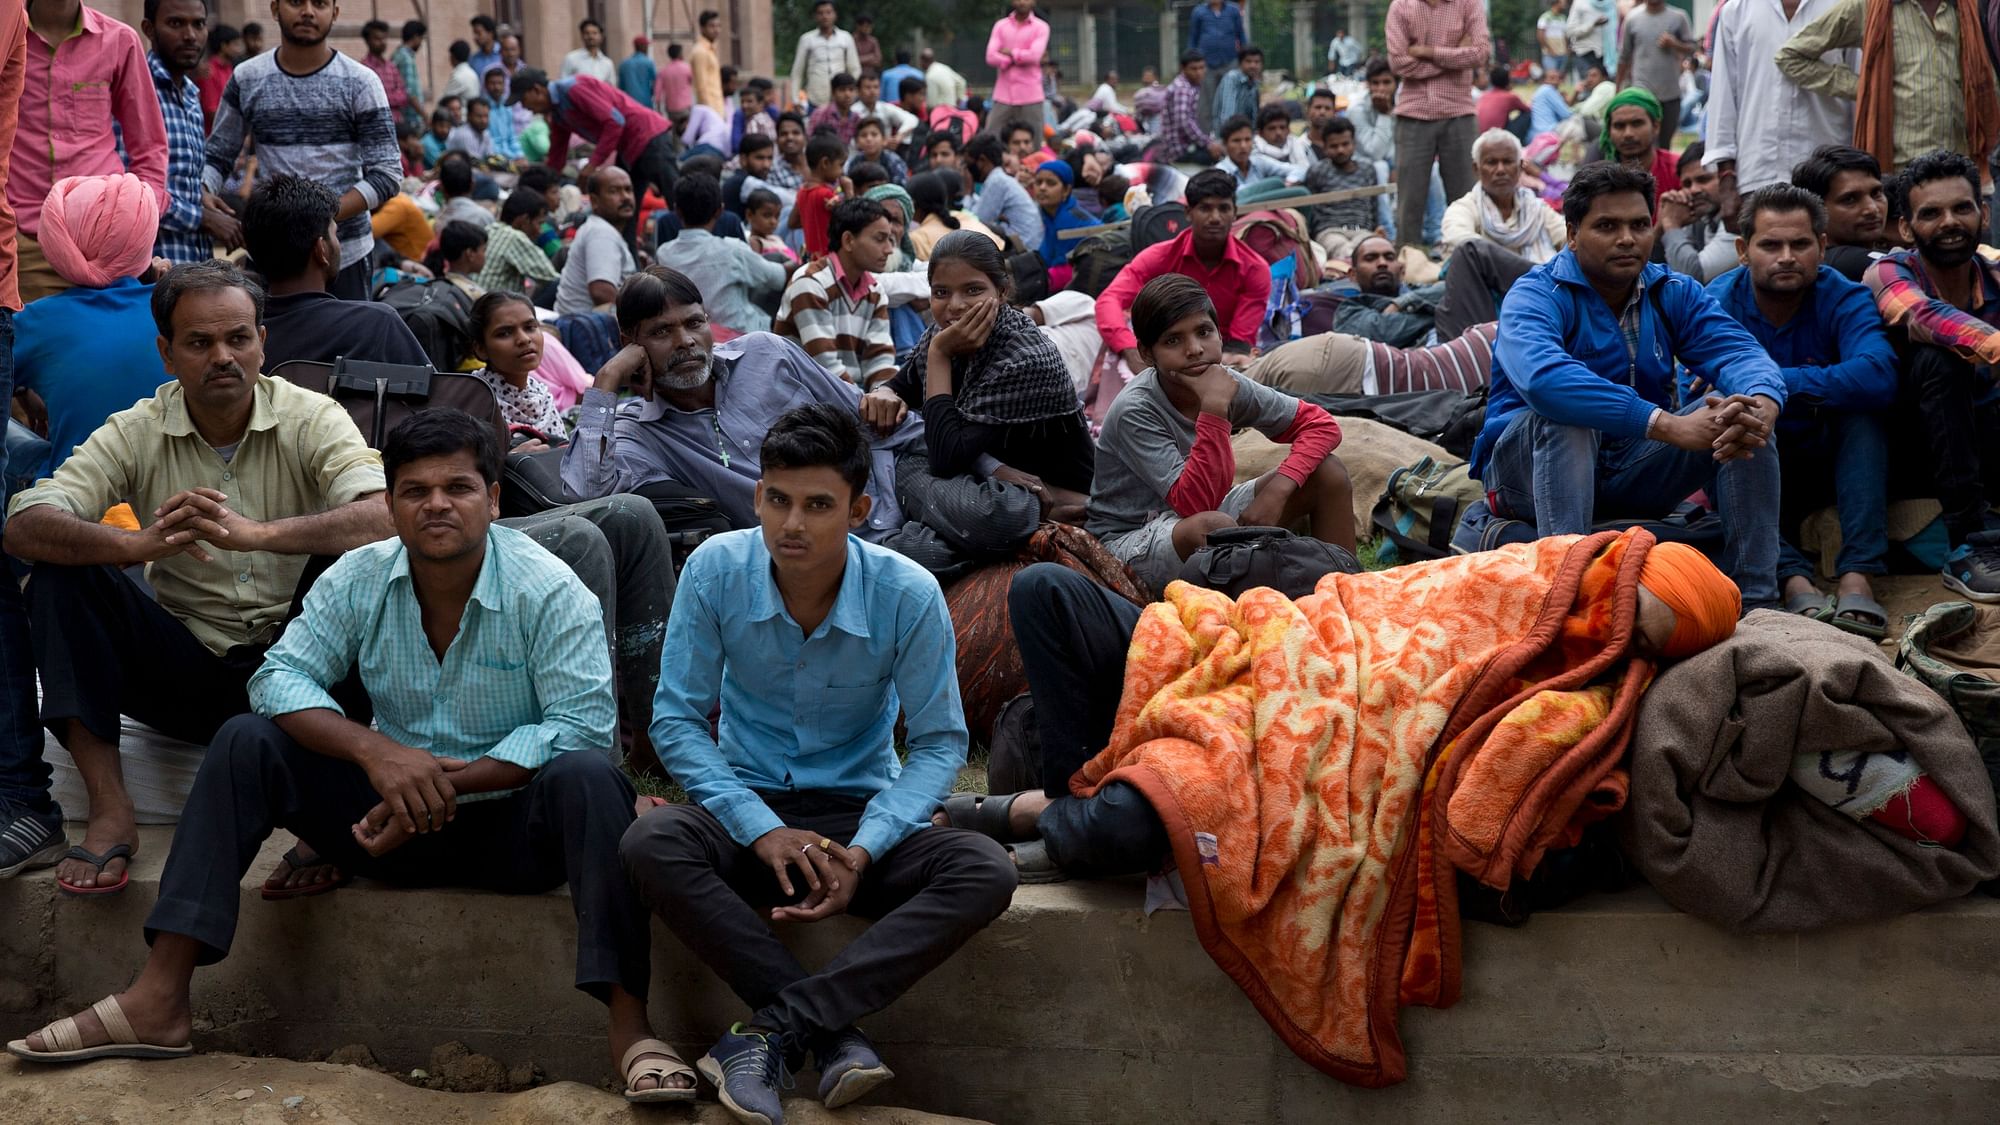 Indian migrant workers wait outside the government transport yard, waiting to buy bus tickets to leave the region, during curfew in Srinagar.